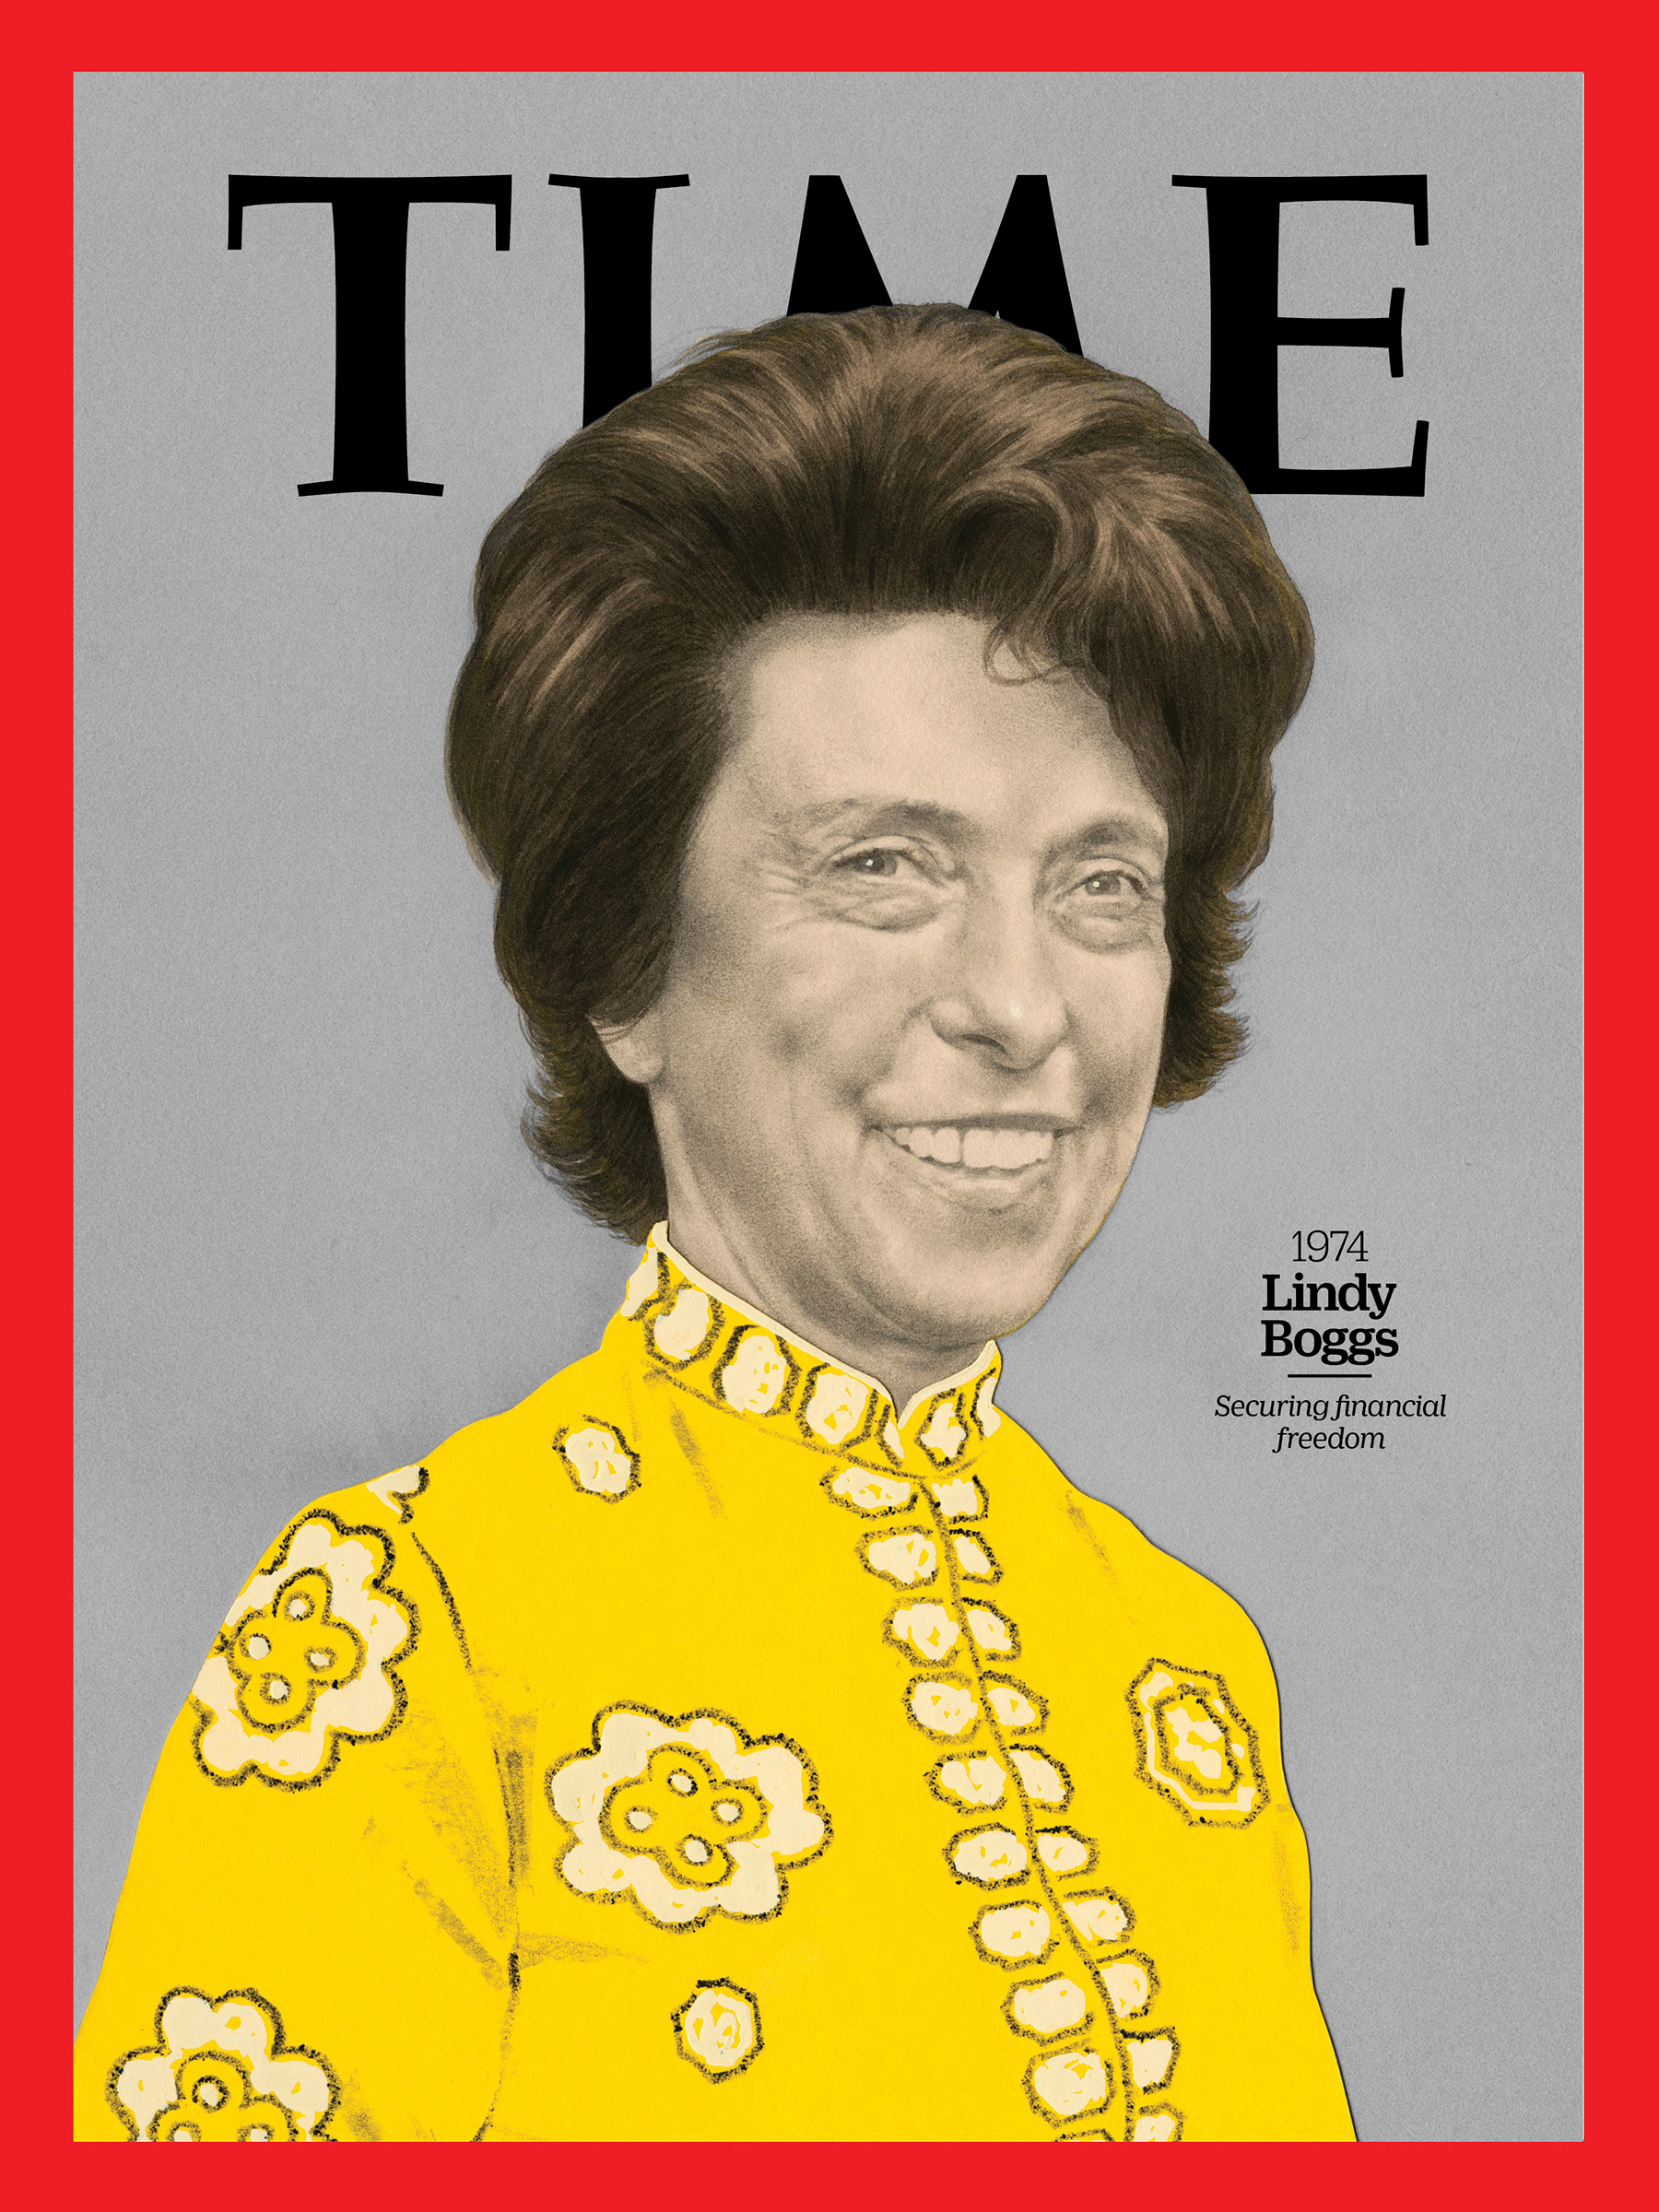 <a href="https://fineartamerica.com/featured/lindy-boggs-1974-time.html"><strong>Buy the cover art→</strong></a> (Illustration by Edward Kinsella for TIME; Everett Collection Historical/Alamy)